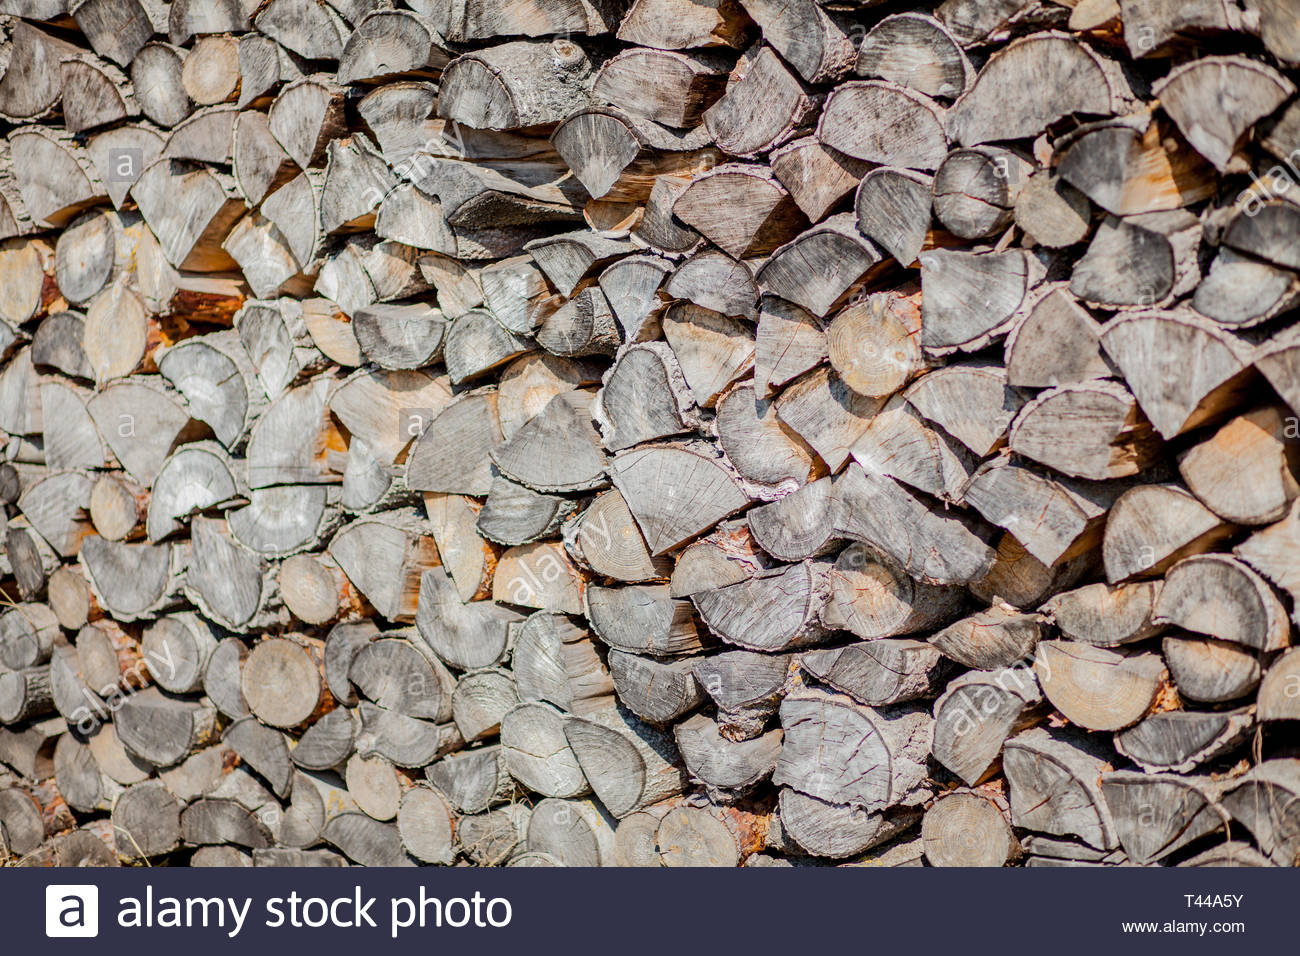 Firewood Background Wall Of Dry Chopped